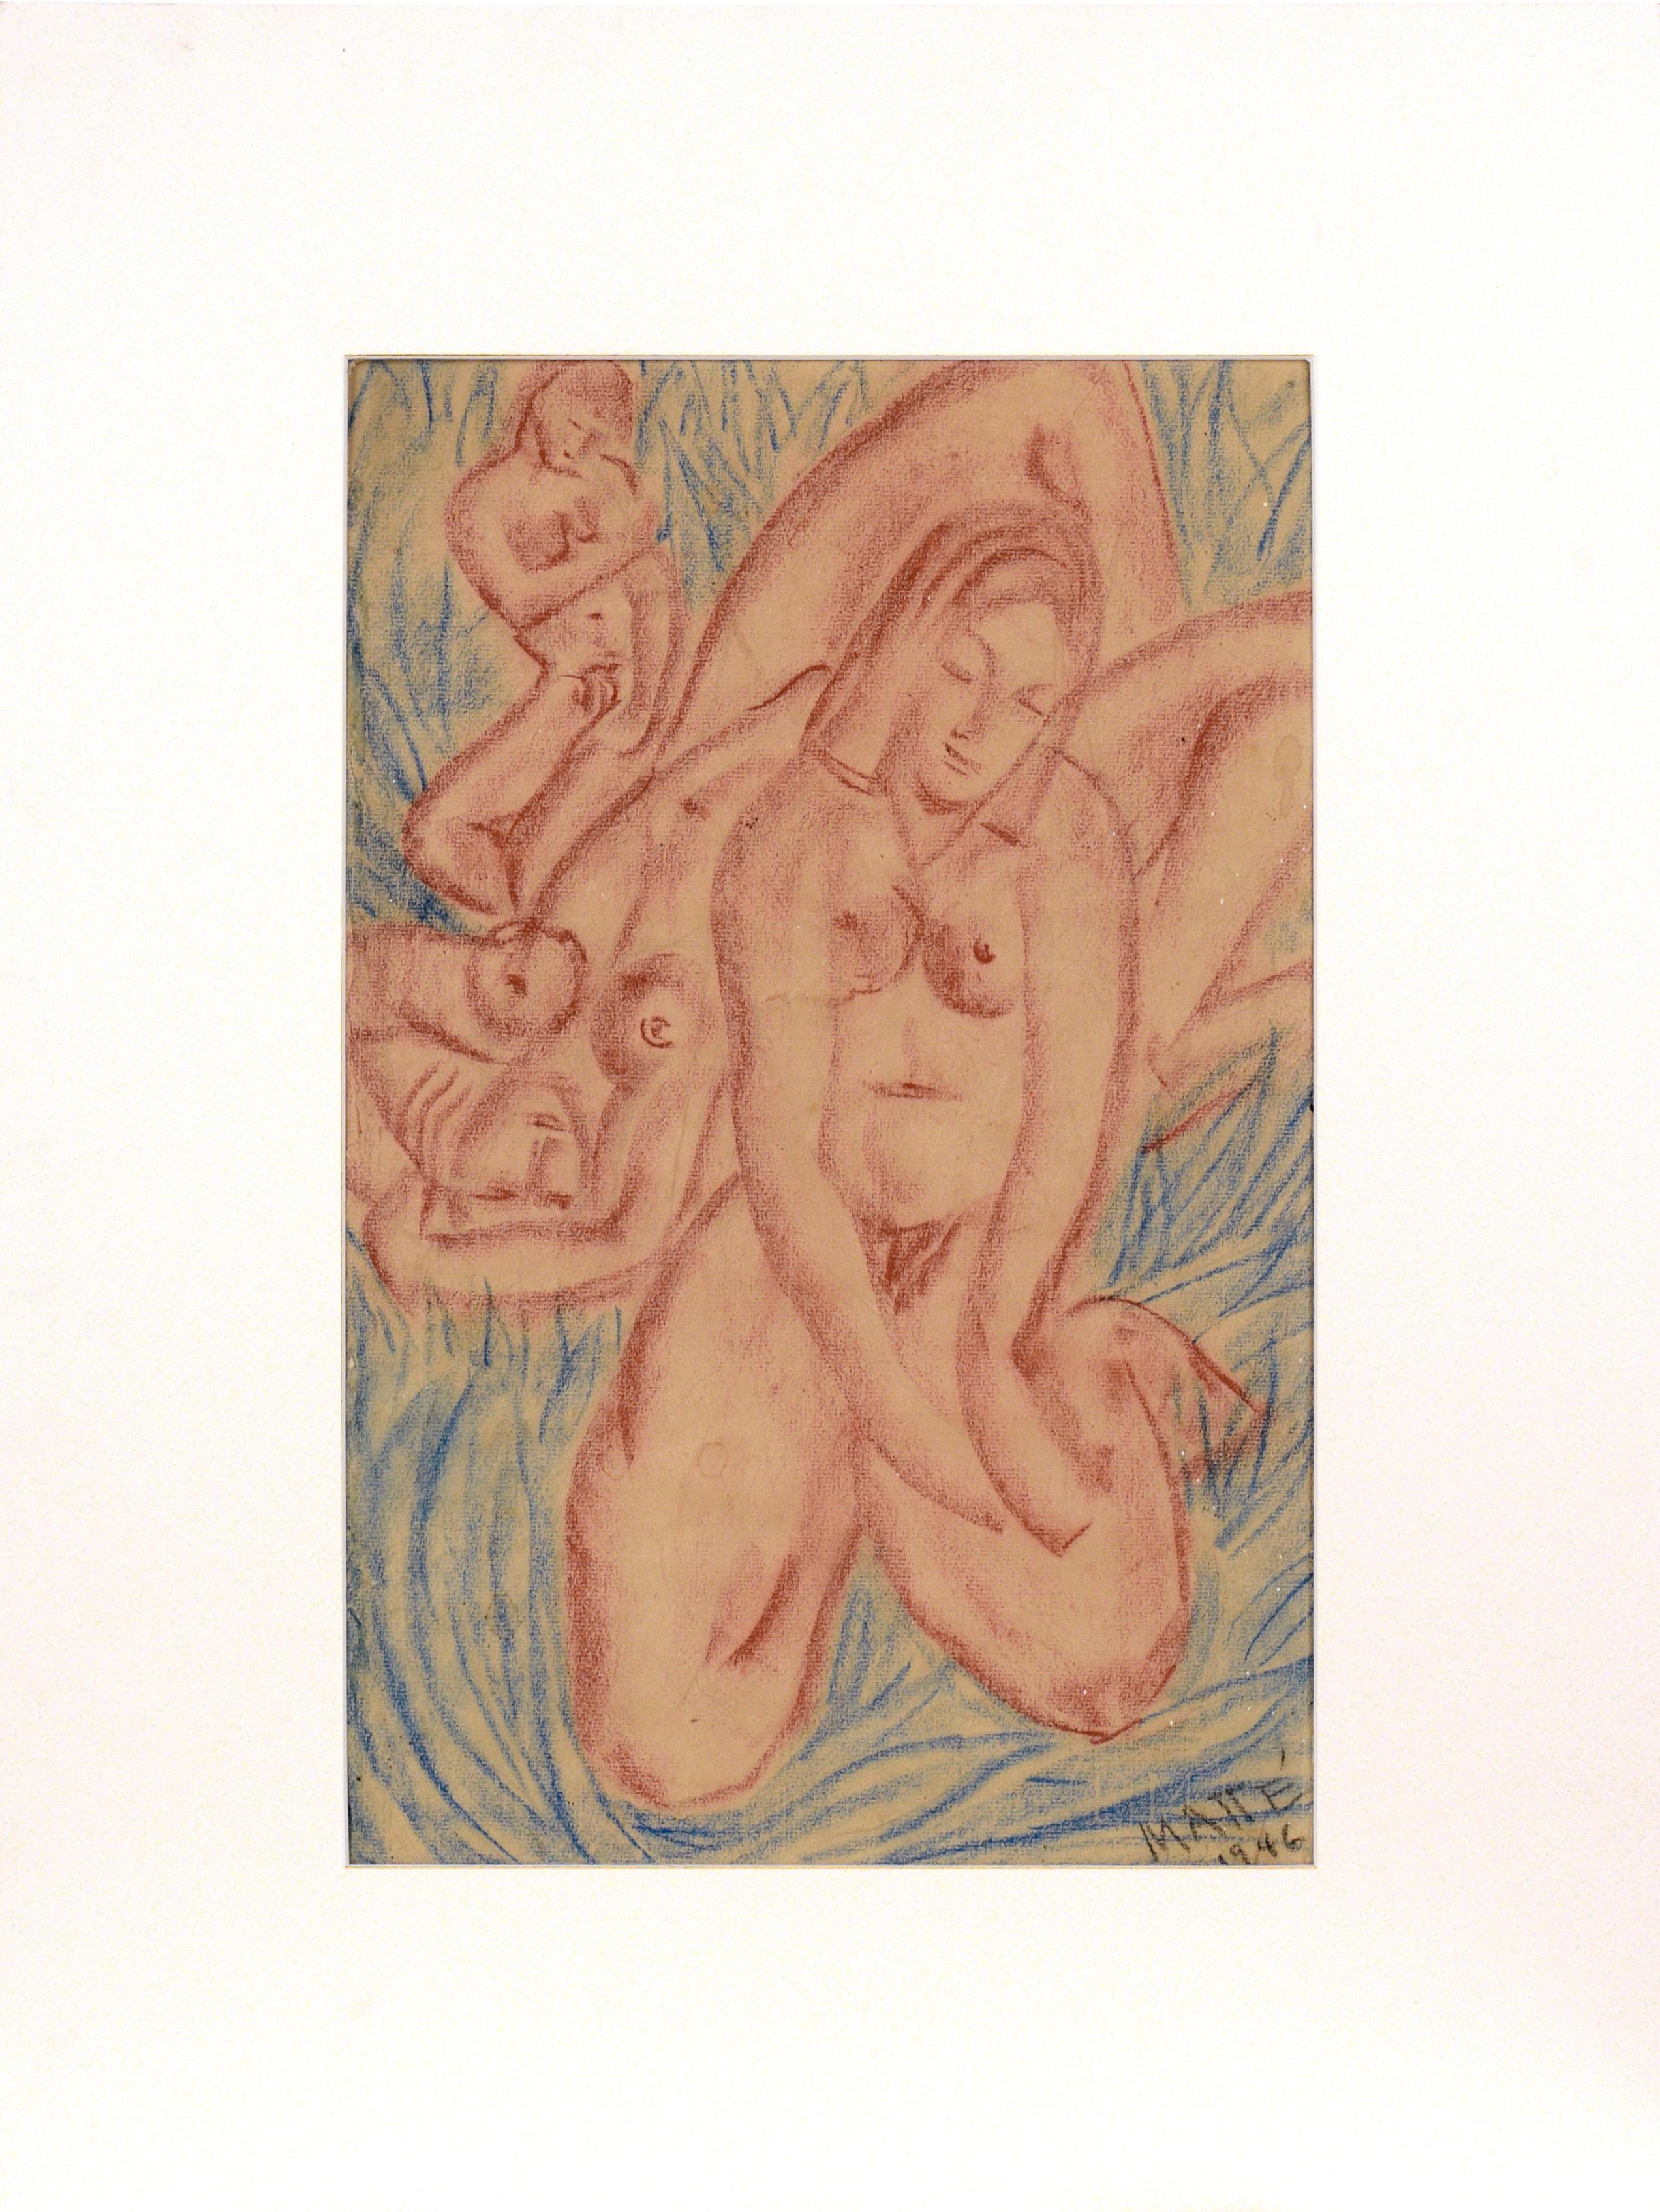 Vintage 3 Figurative Nudes in Conté Crayon on Paper (1946) Matté‎ 

In an indigo blue and burnt orange color palette by French artist Matté‎  (French, 20th C), this artwork gives an vintage tropical feel with a leafy pattern surrounding three nude